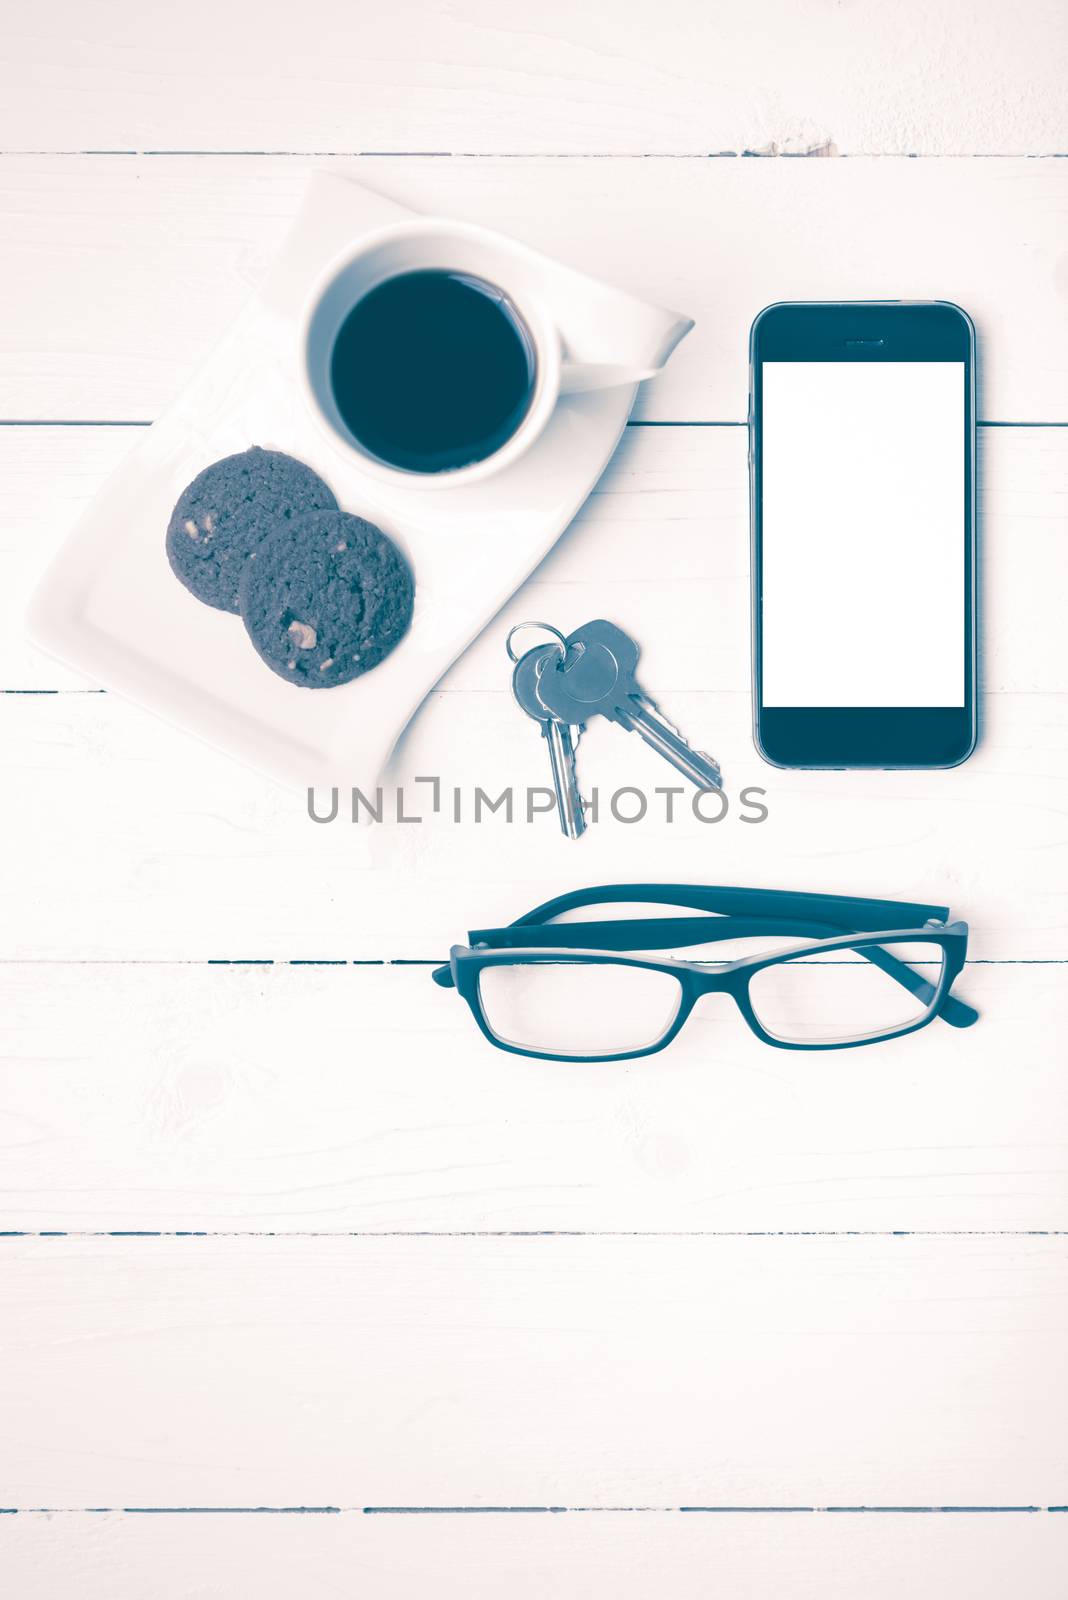 coffee cup with cookie,phone,eyeglasses and key vintage style by ammza12